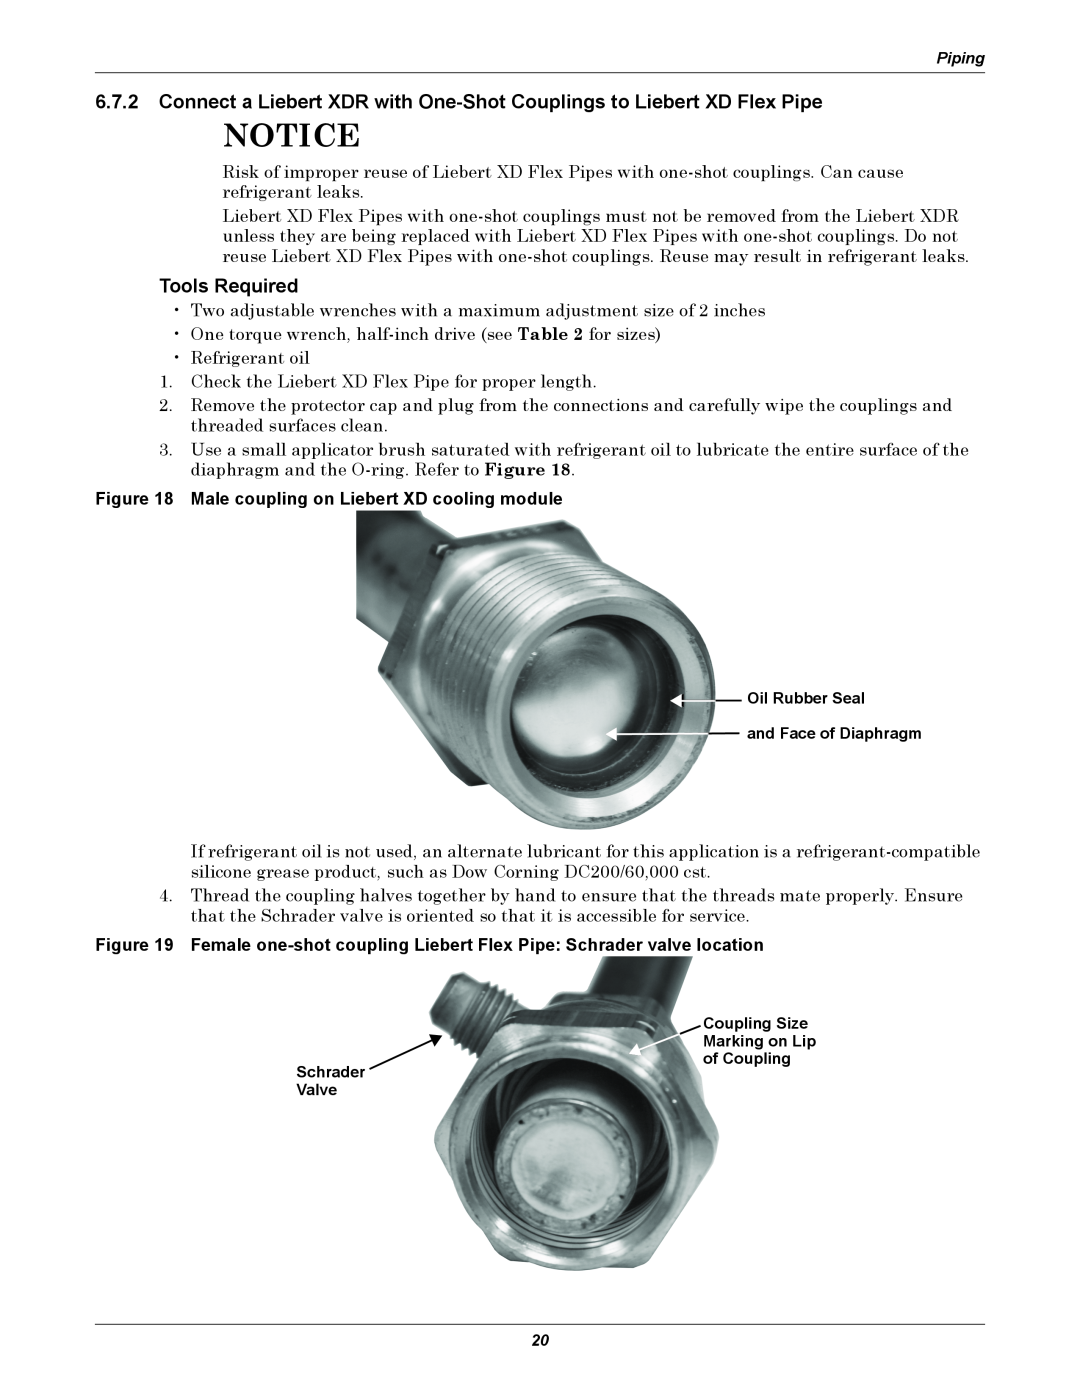 Emerson XDR user manual Tools Required 